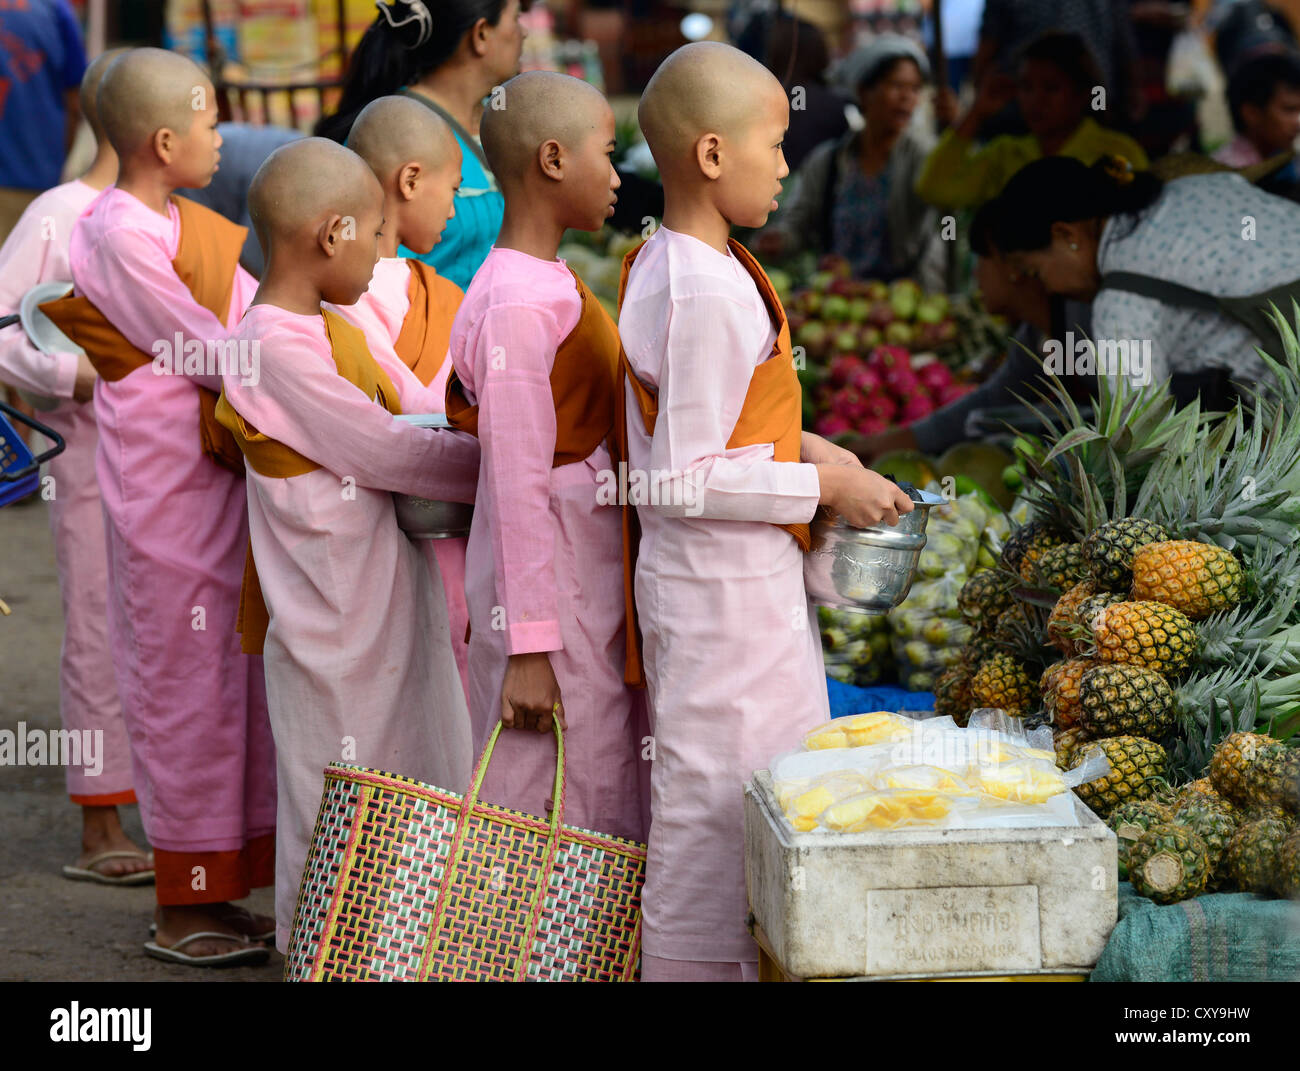 Morning scene in Kengtung, Myanmar. Nuns lining up for alms in a local market. Stock Photo